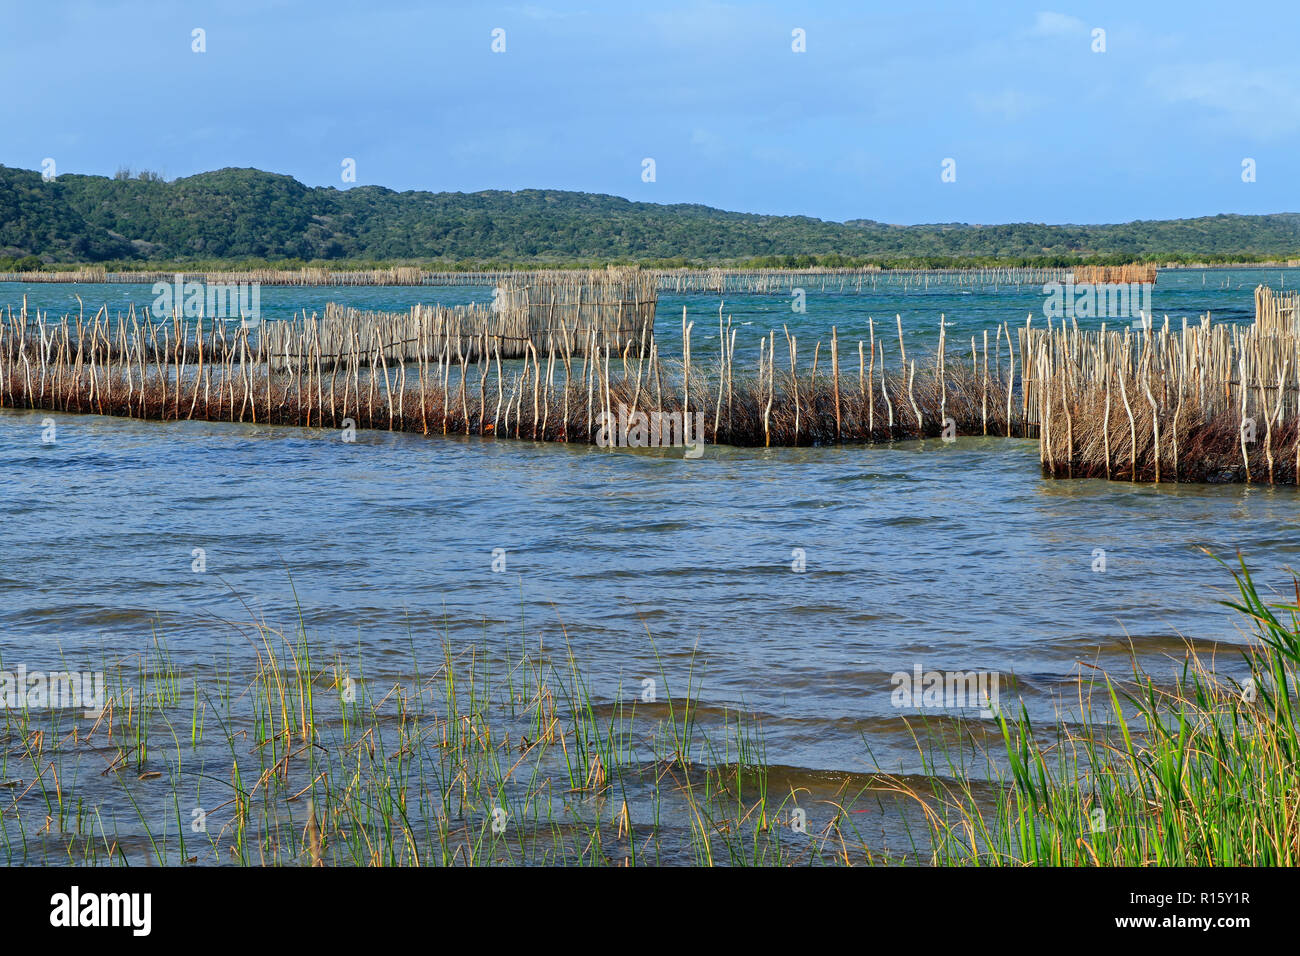 Traditional Tsonga fish traps built in the Kosi Bay estuary, Tongaland, South Africa Stock Photo